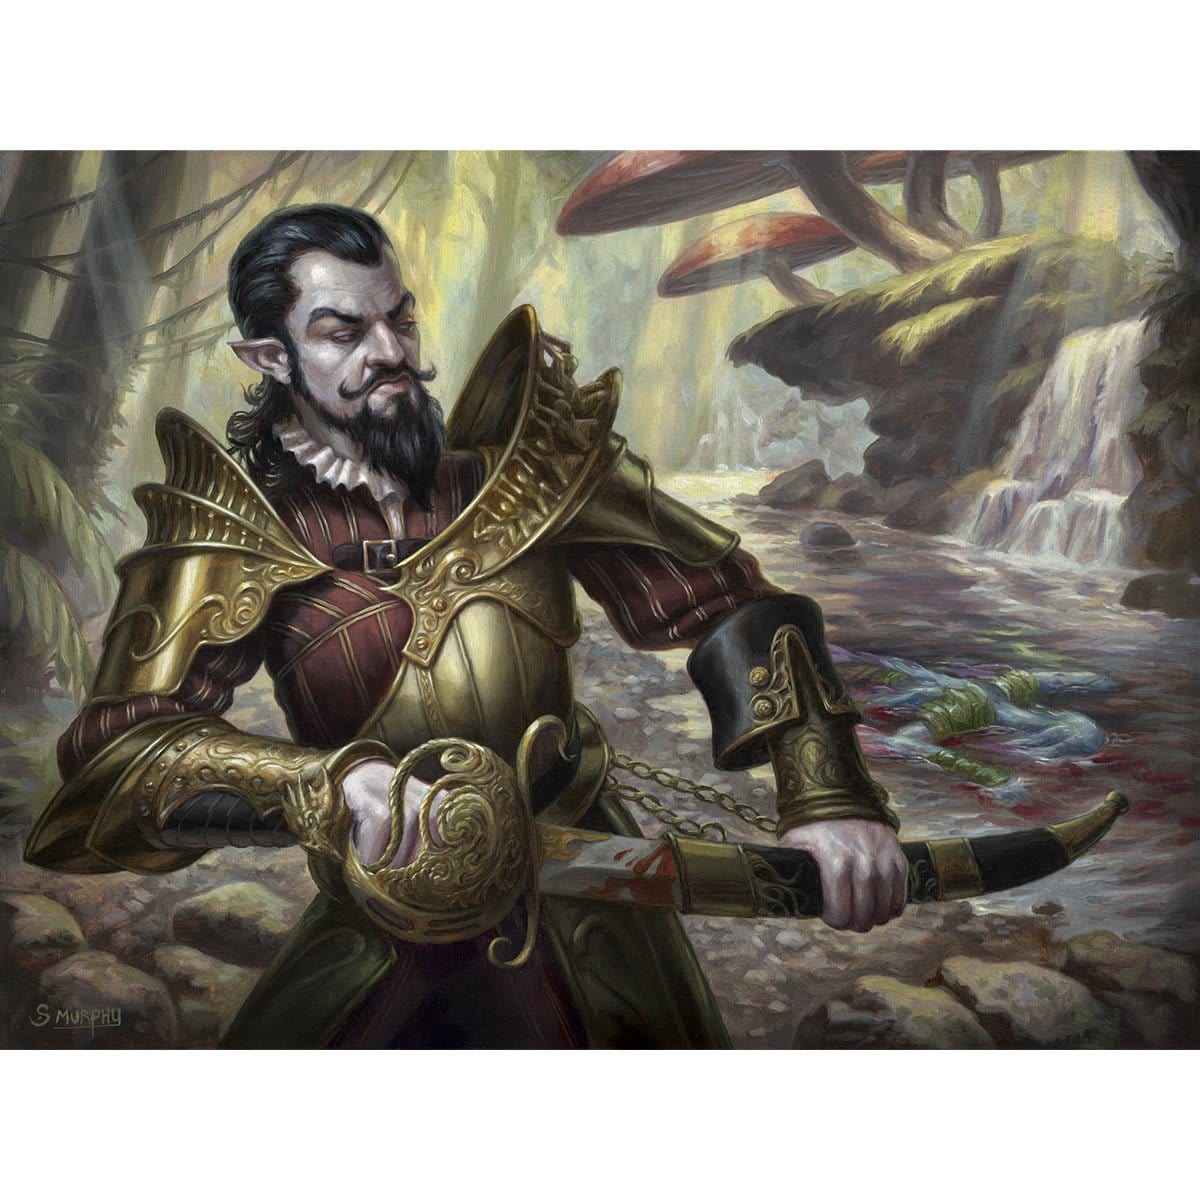 Bishop's Soldier Print - Print - Original Magic Art - Accessories for Magic the Gathering and other card games